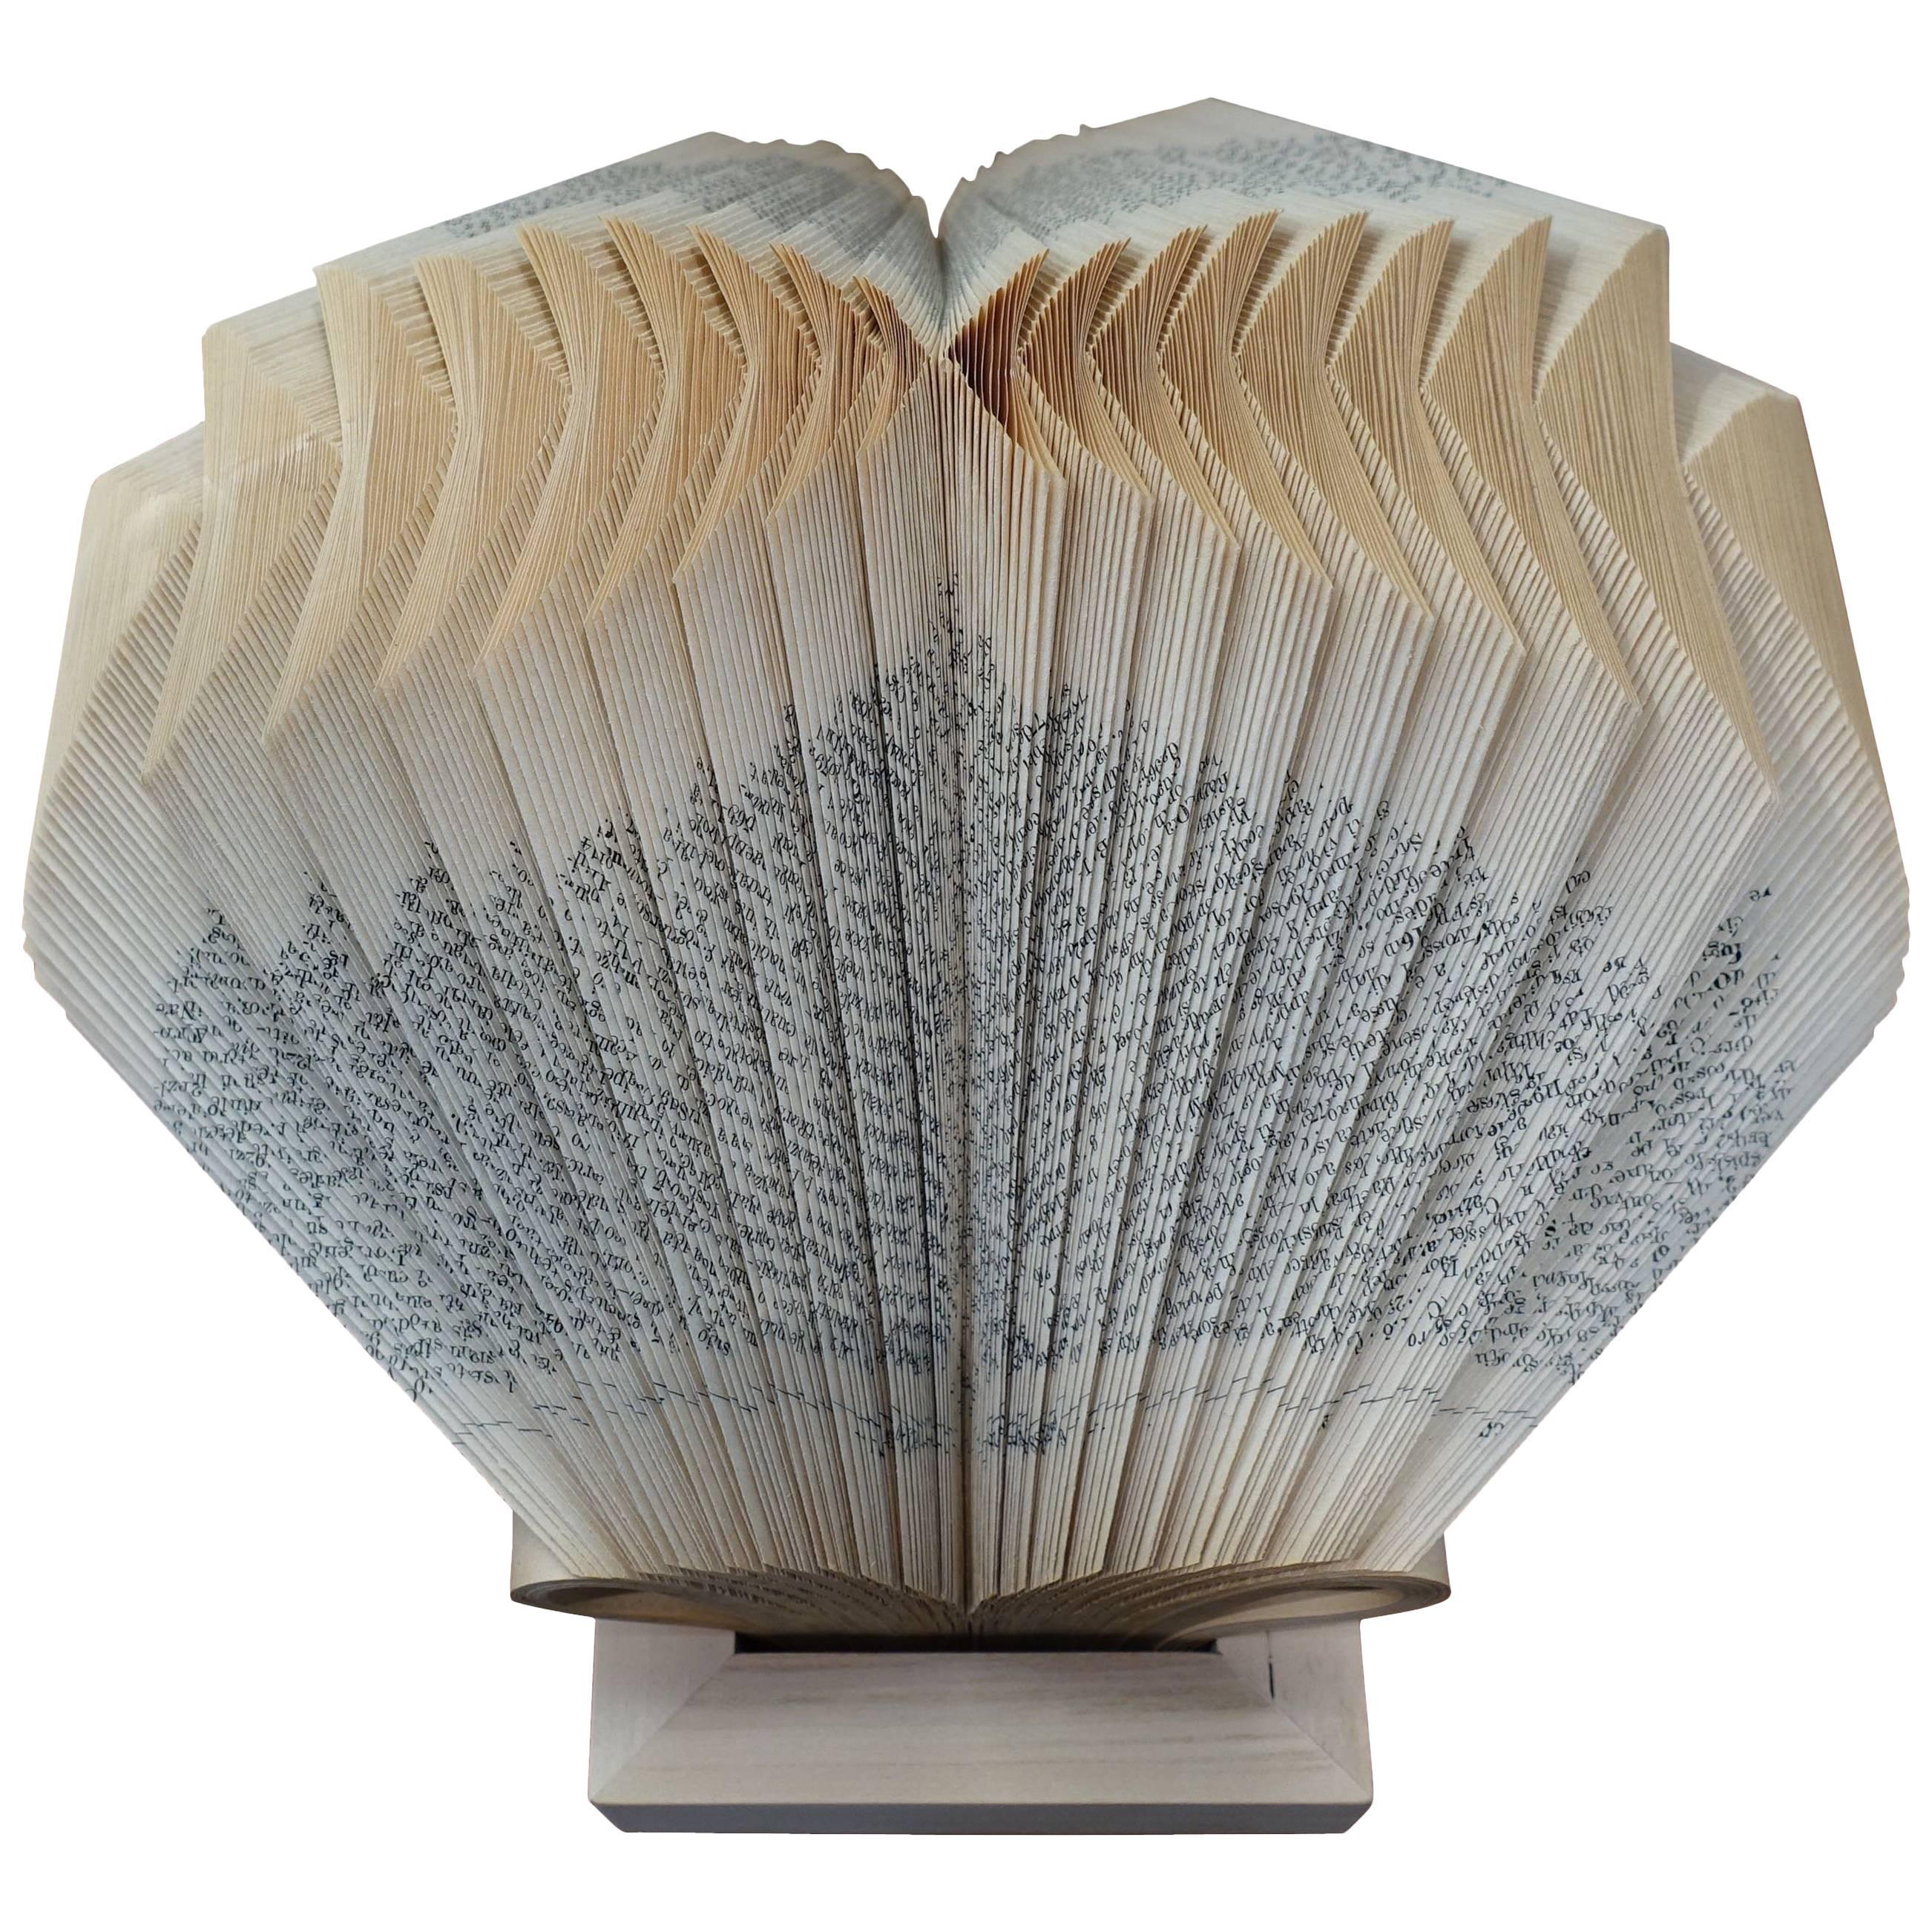 Contemporary Italian hand folded pages from vintage book to create decorative sculpture.
Base solid wood.